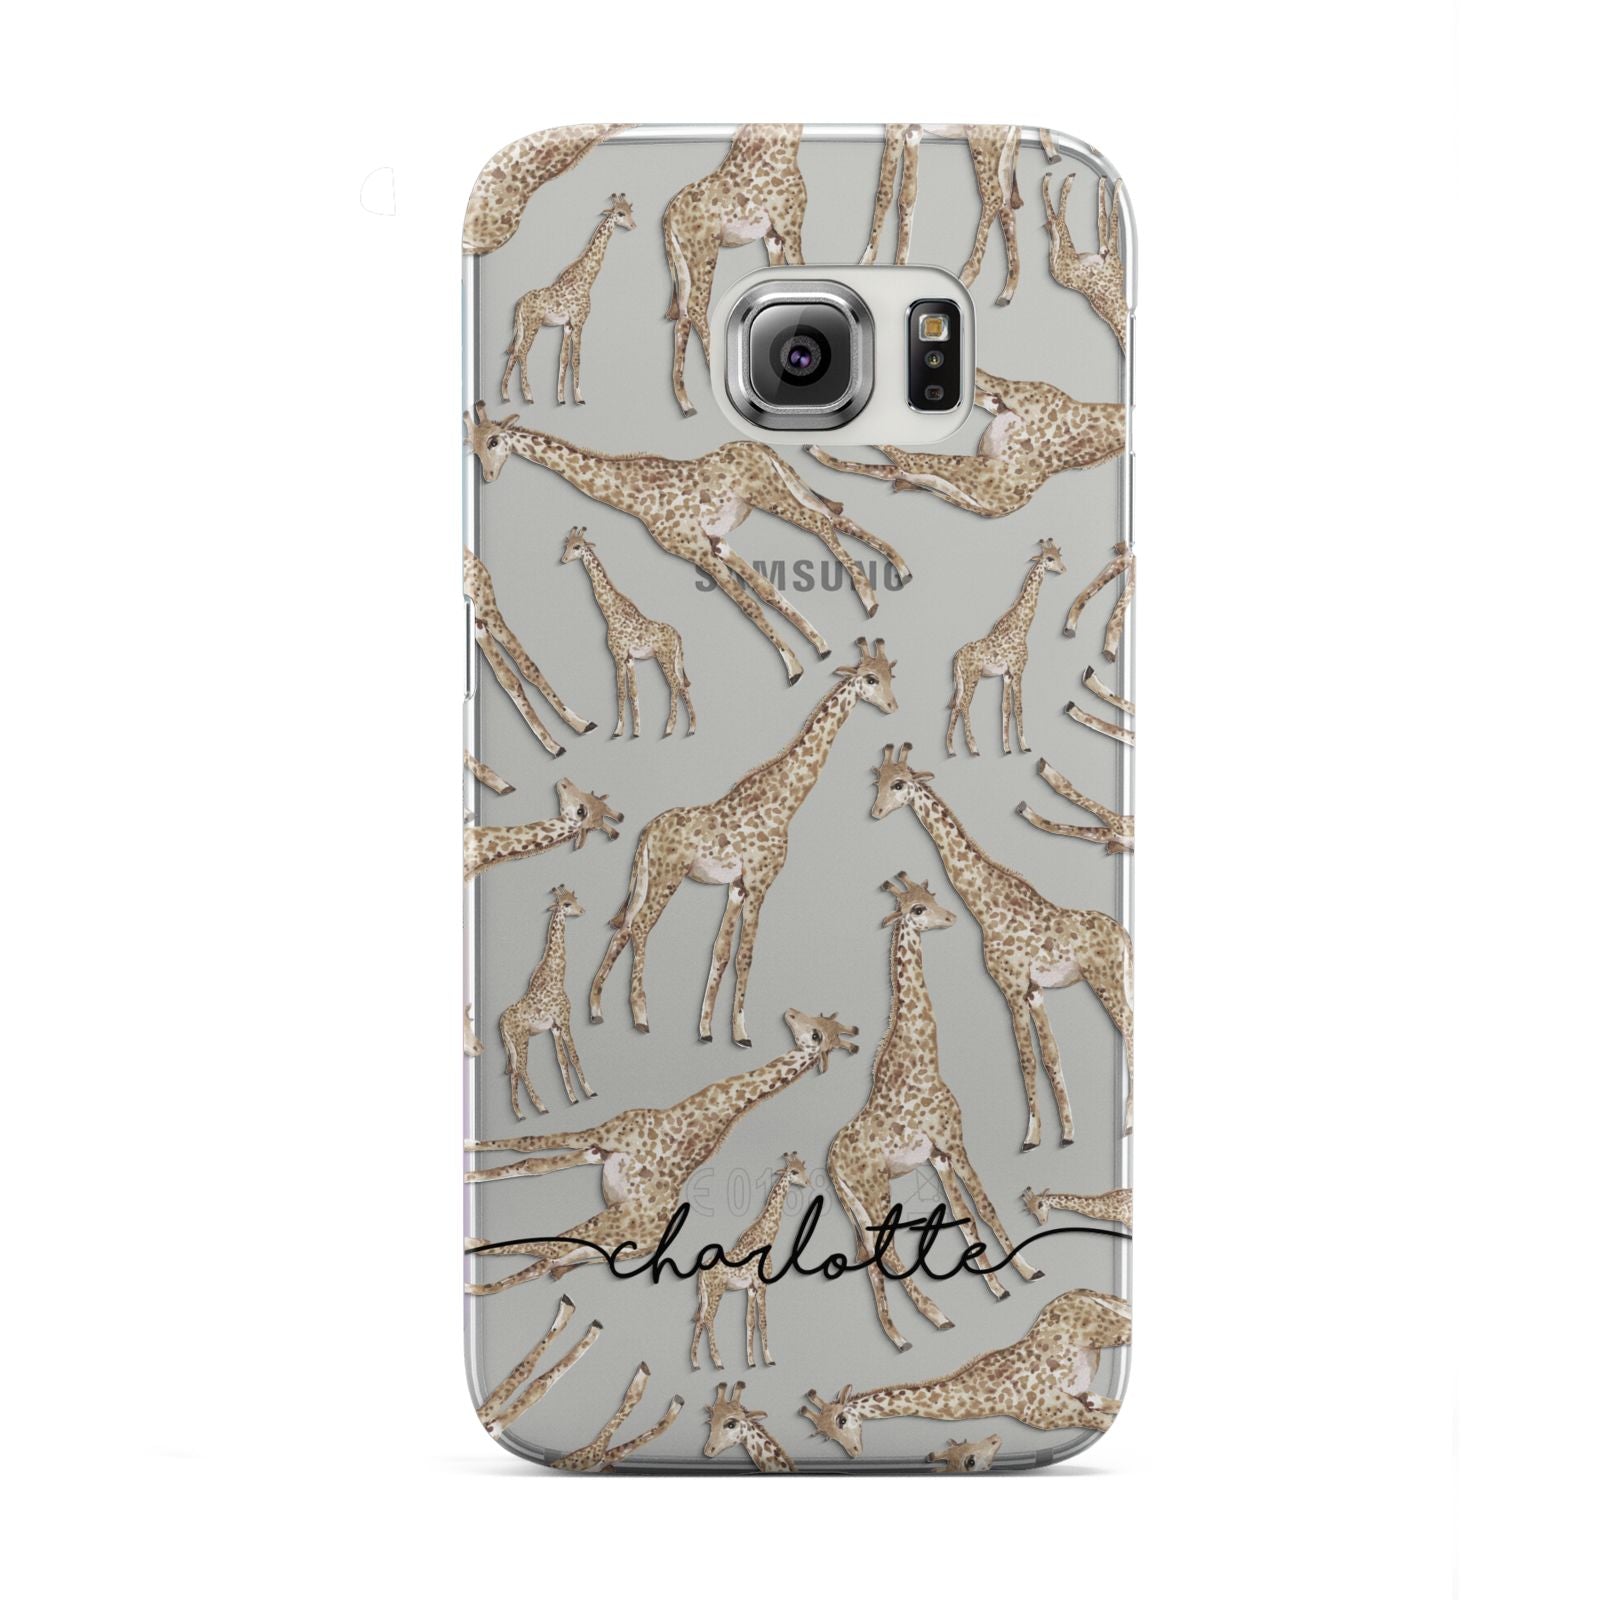 Personalised Giraffes with Name Samsung Galaxy S6 Edge Case